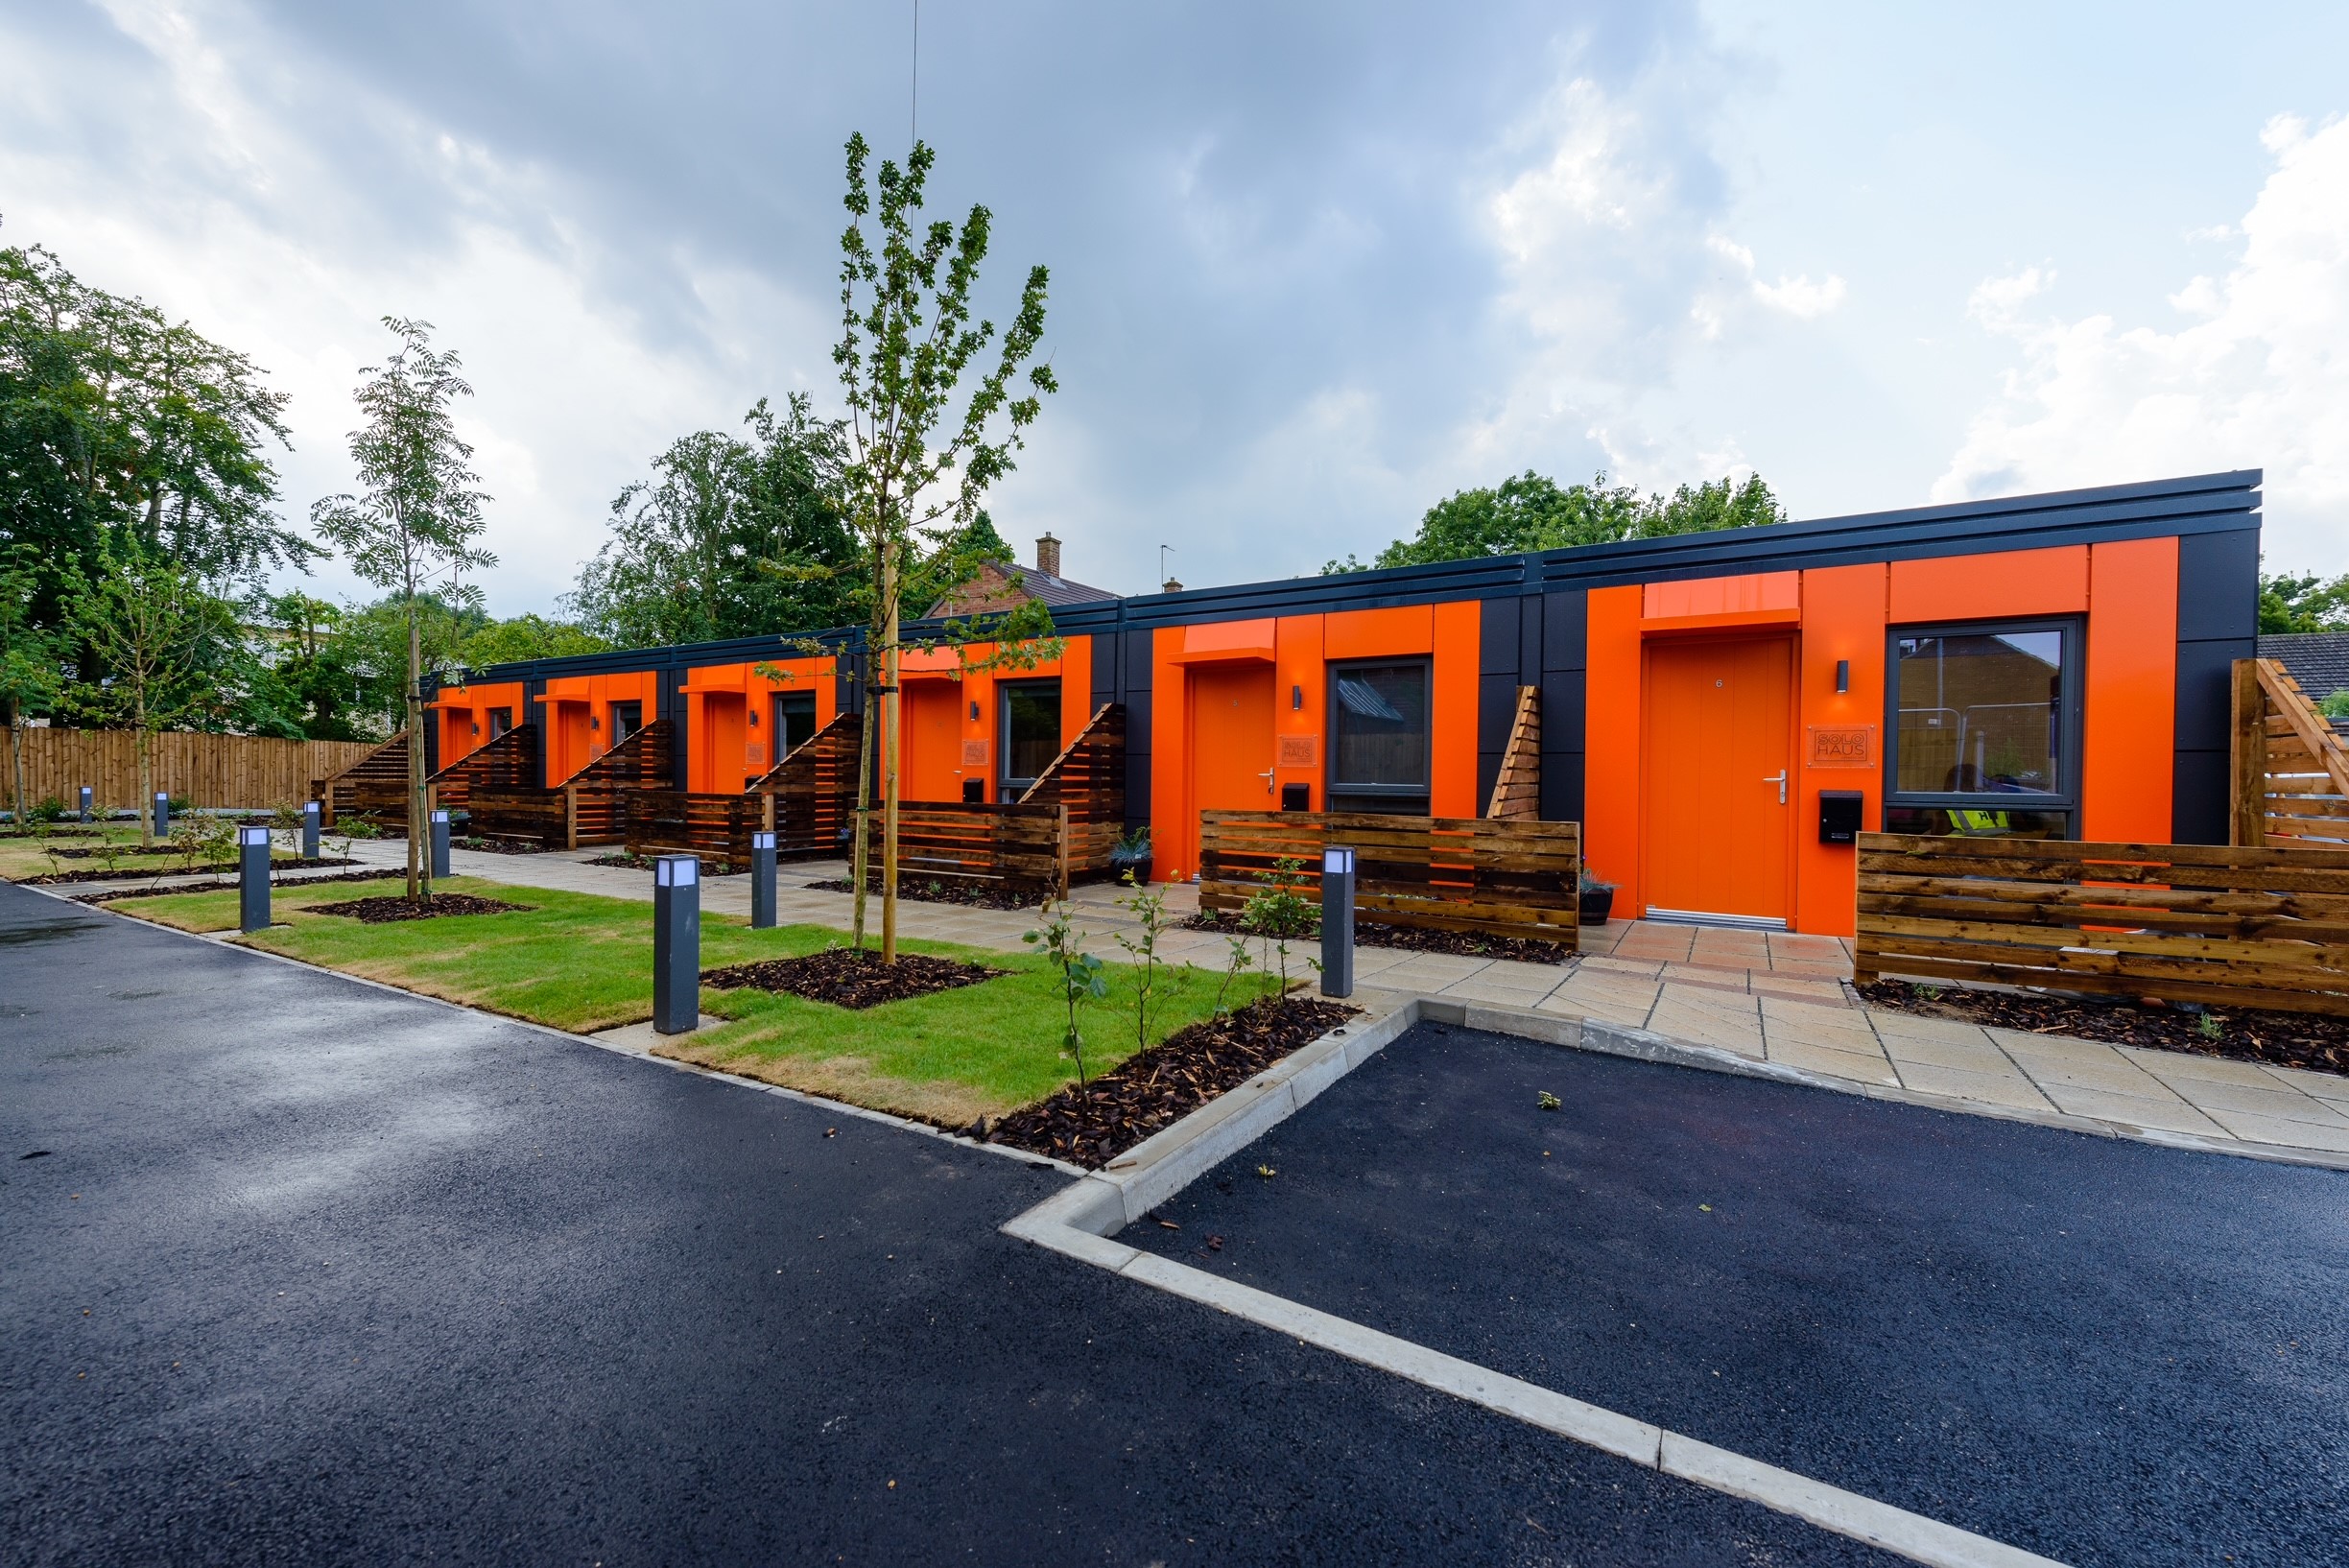 How Are Modular Homes Helping to Tackle Homelessness?